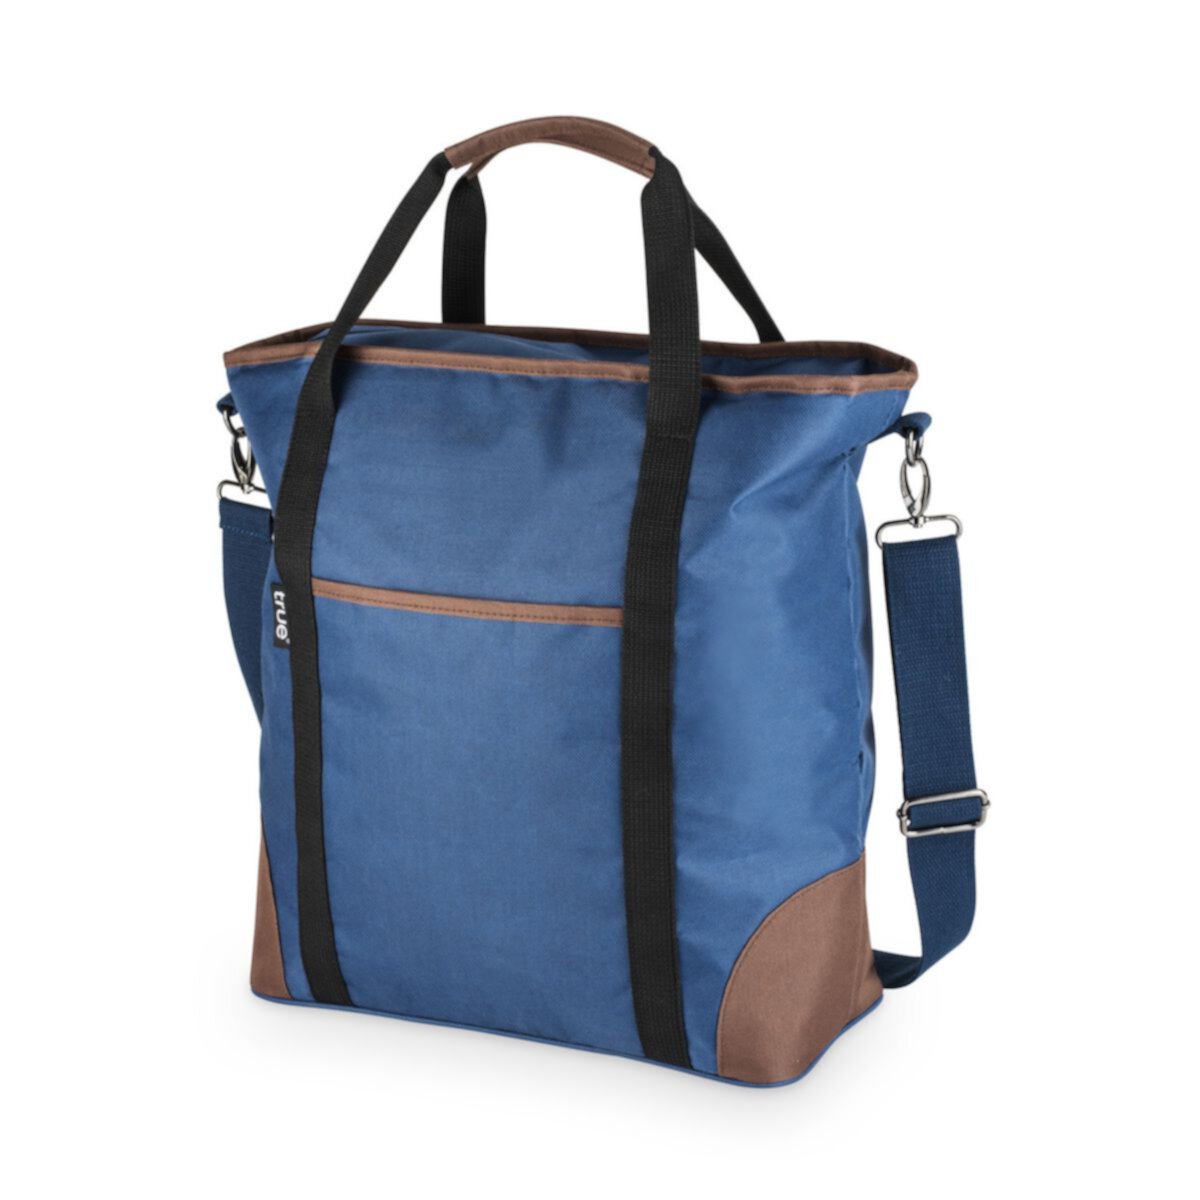 Insulated Cooler Tote Bag by True TRUE